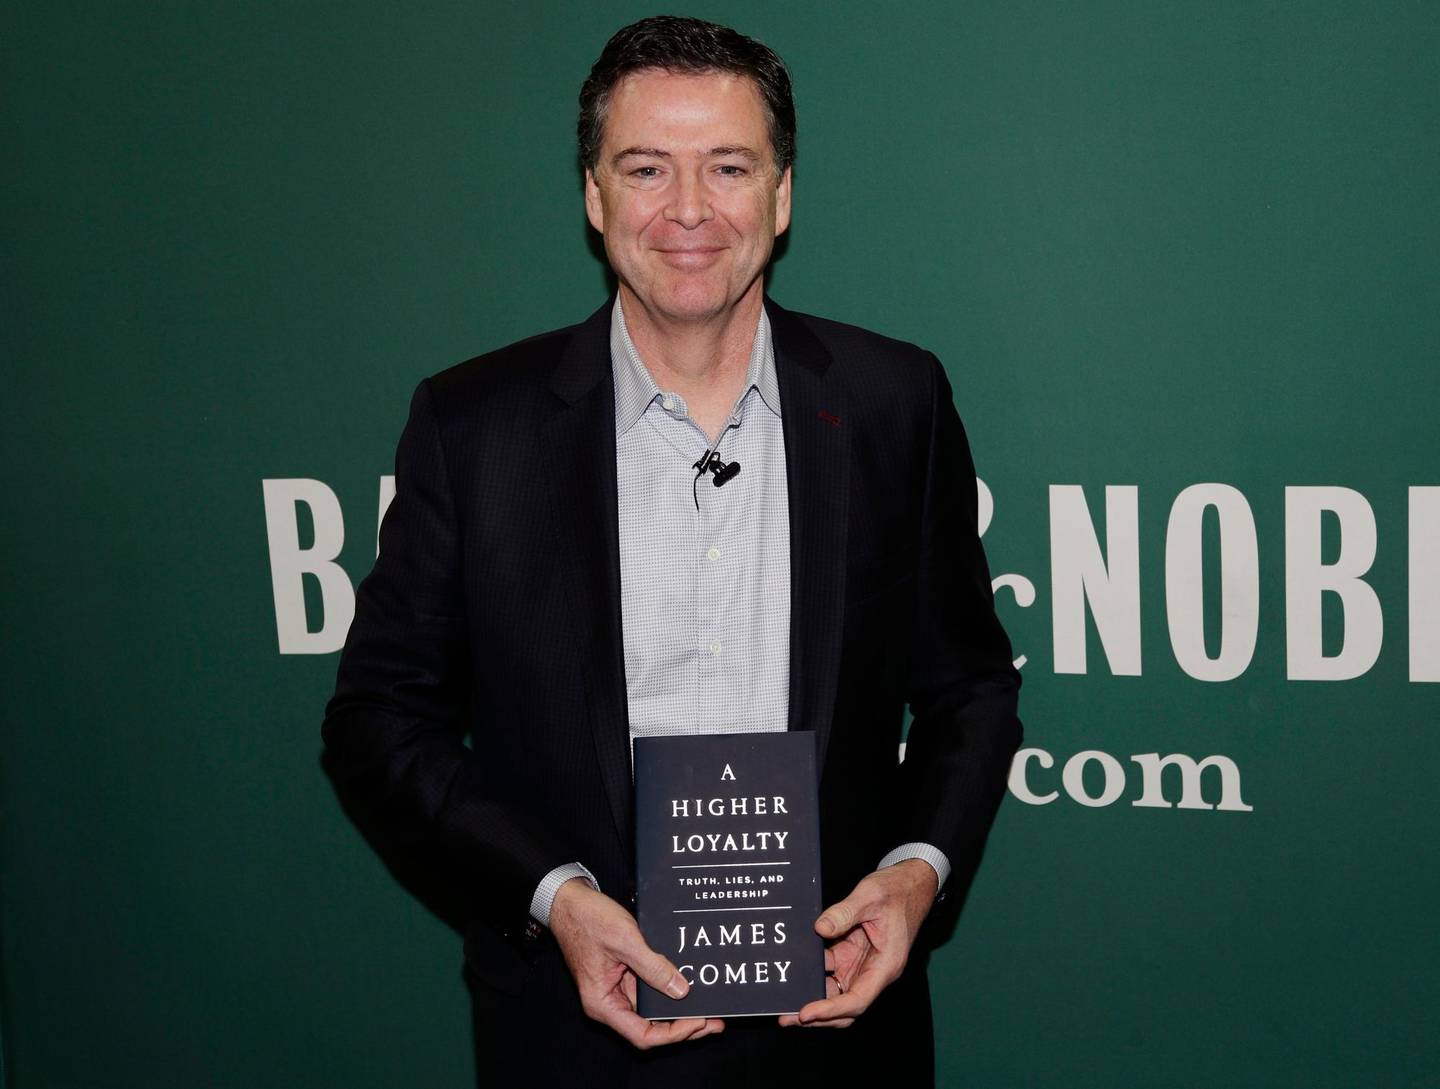 Former FBI director James Comey poses for photographs at a Barnes & Noble book store before speaking Wednesday, April 18, 2018, in New York. (AP Photo/Frank Franklin II)